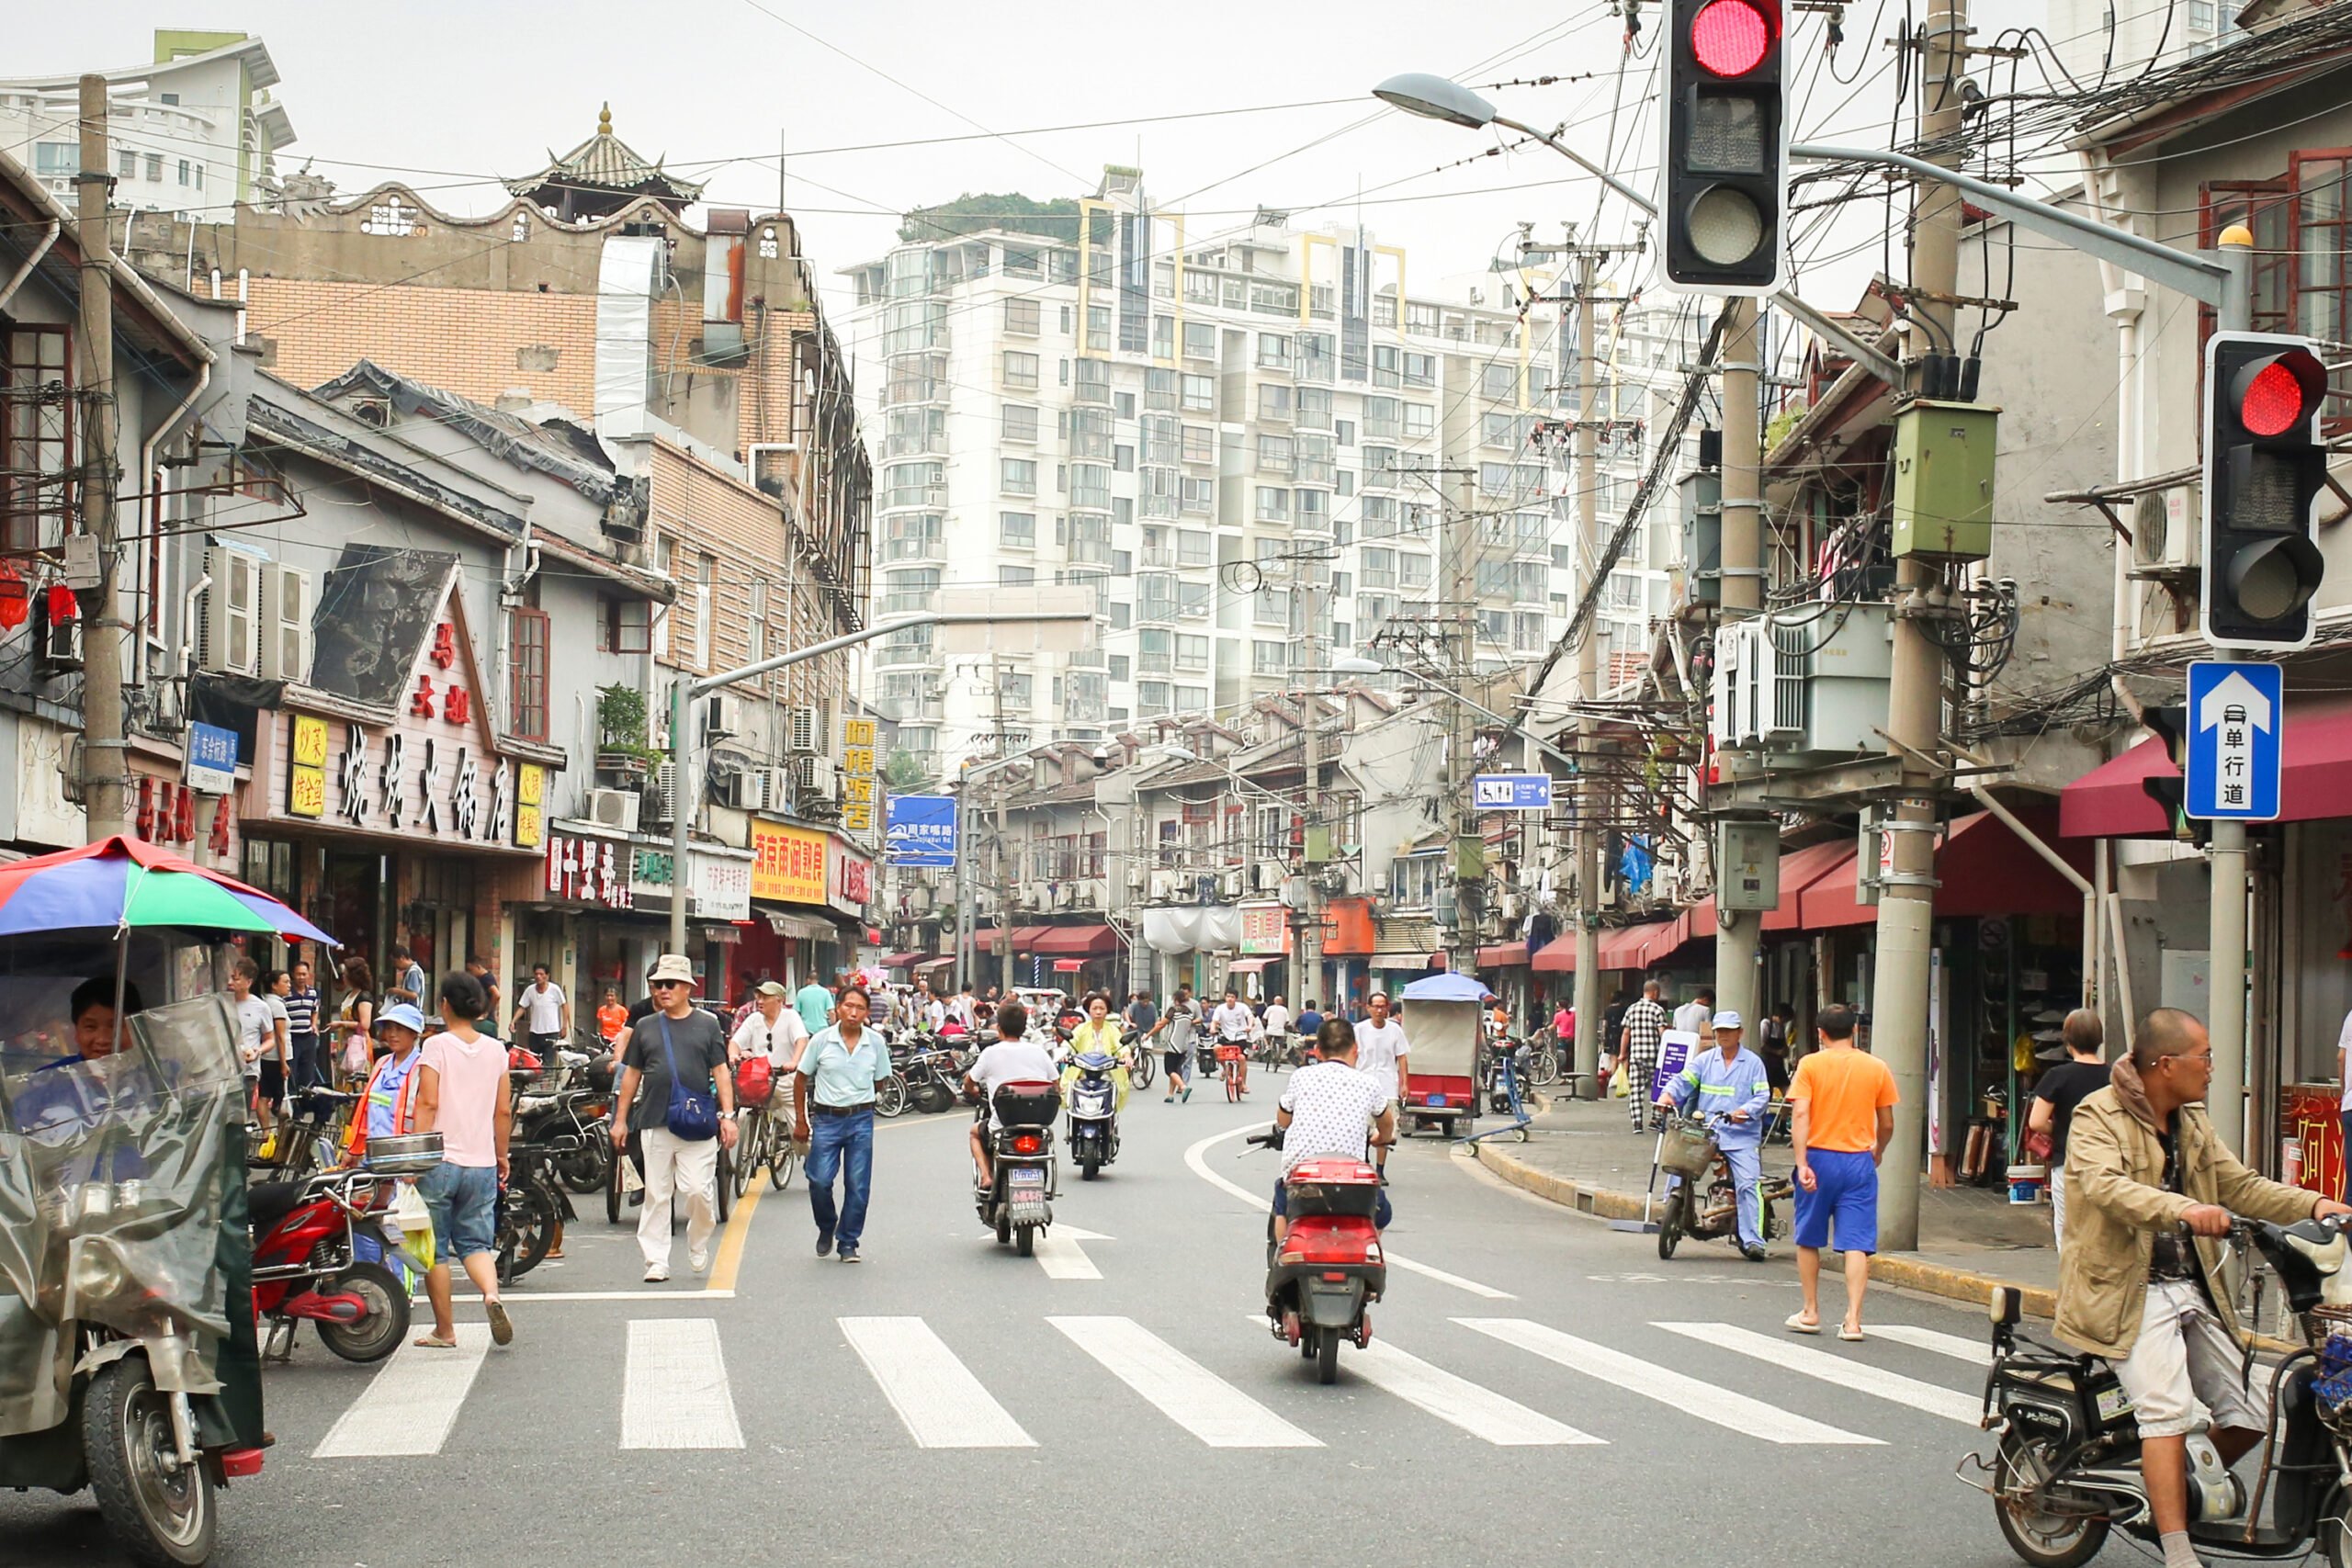 Walk Through Historic, Tourist-free Streets, Alleys And Markets To See How The Locals Live In China's Biggest City During Our Old Shanghai Breakfast Tour